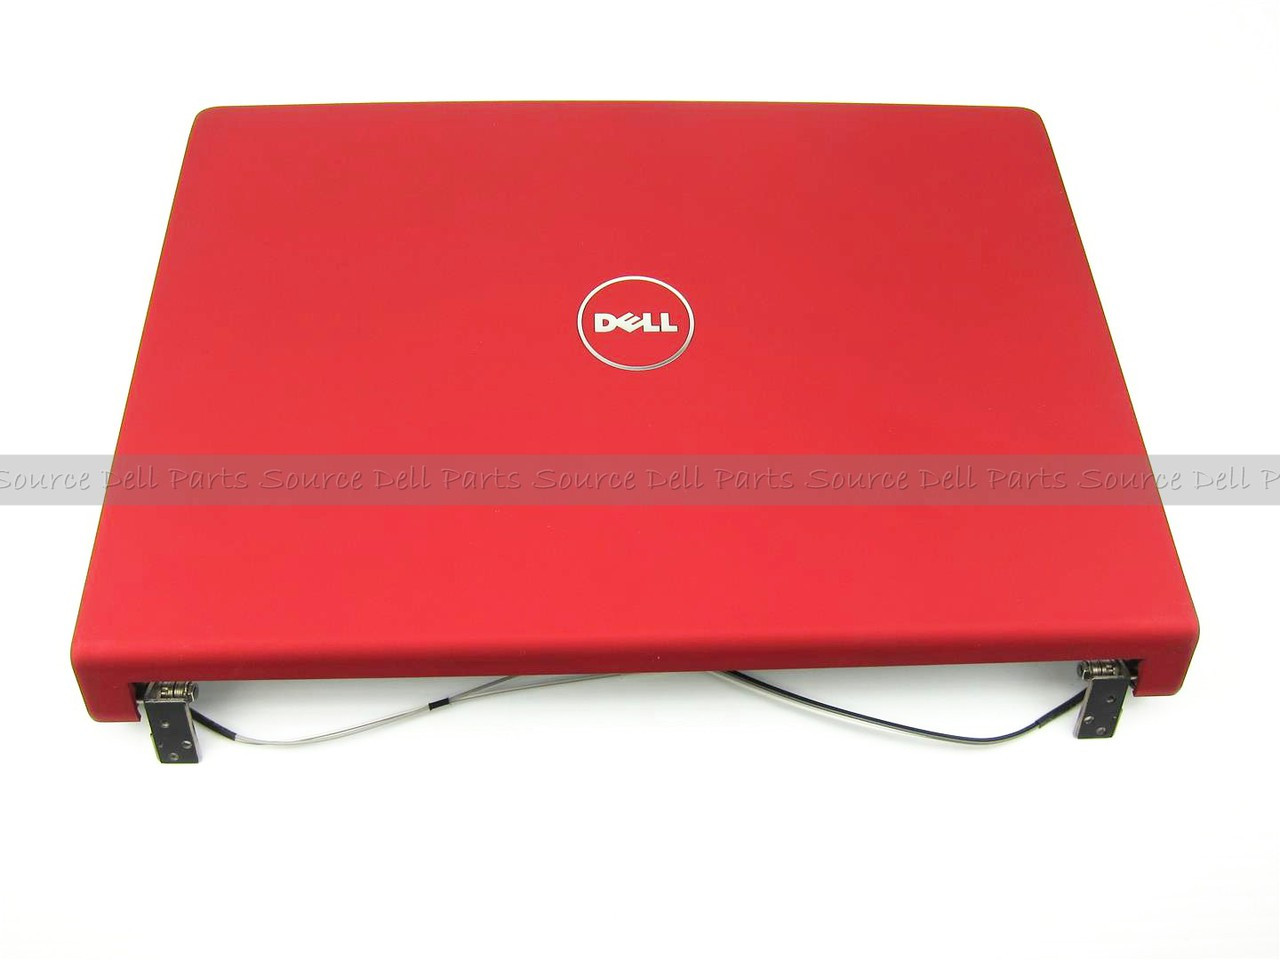 Dell Studio 1457 / 1458 Red LCD Back Cover Lid Top Plastic with Hinges - 00K83